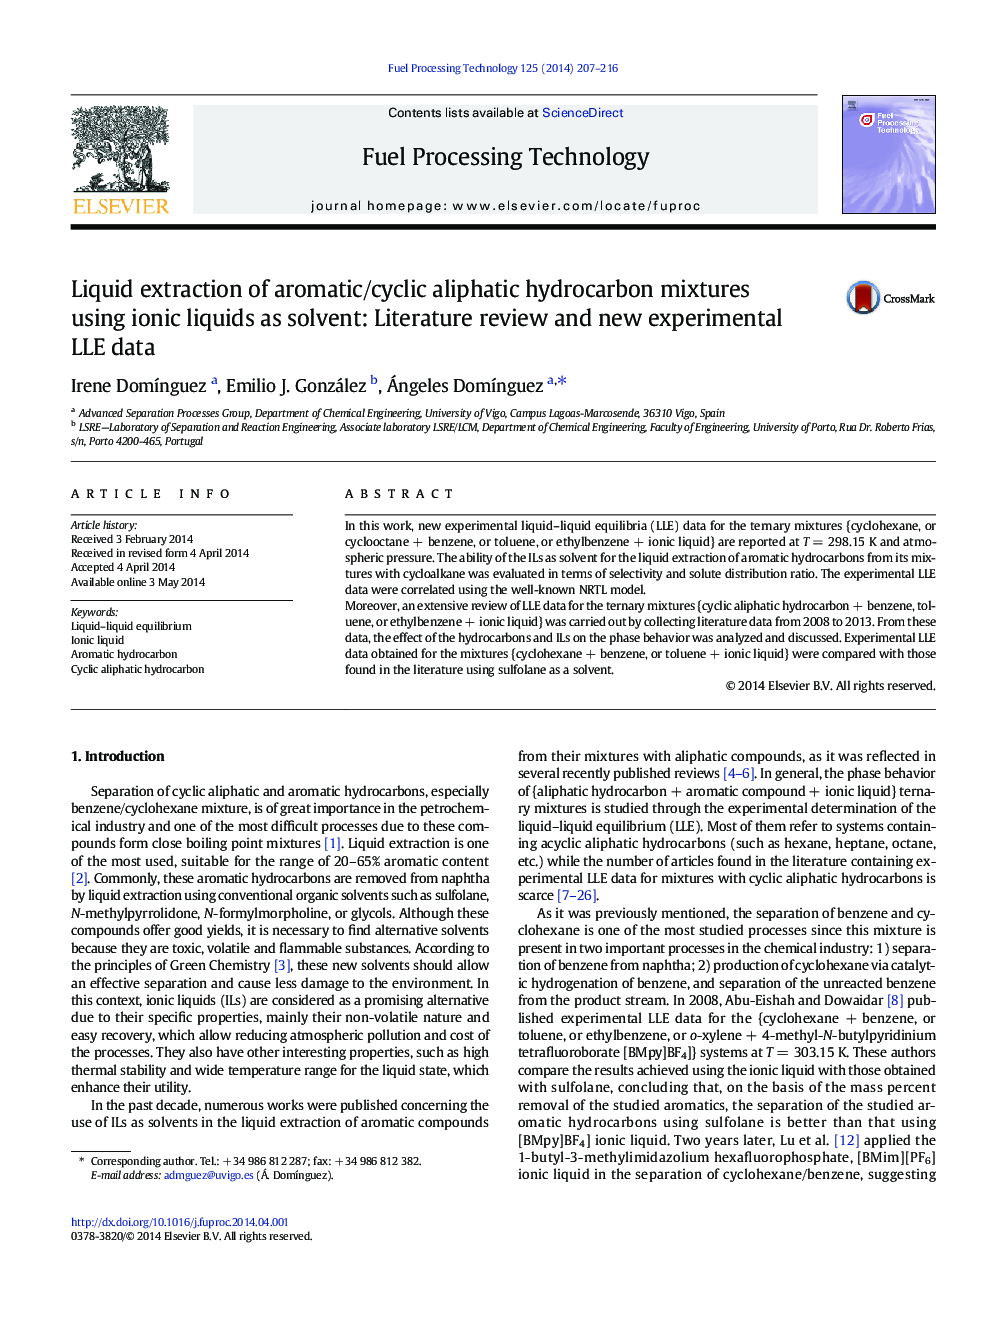 Liquid extraction of aromatic/cyclic aliphatic hydrocarbon mixtures using ionic liquids as solvent: Literature review and new experimental LLE data